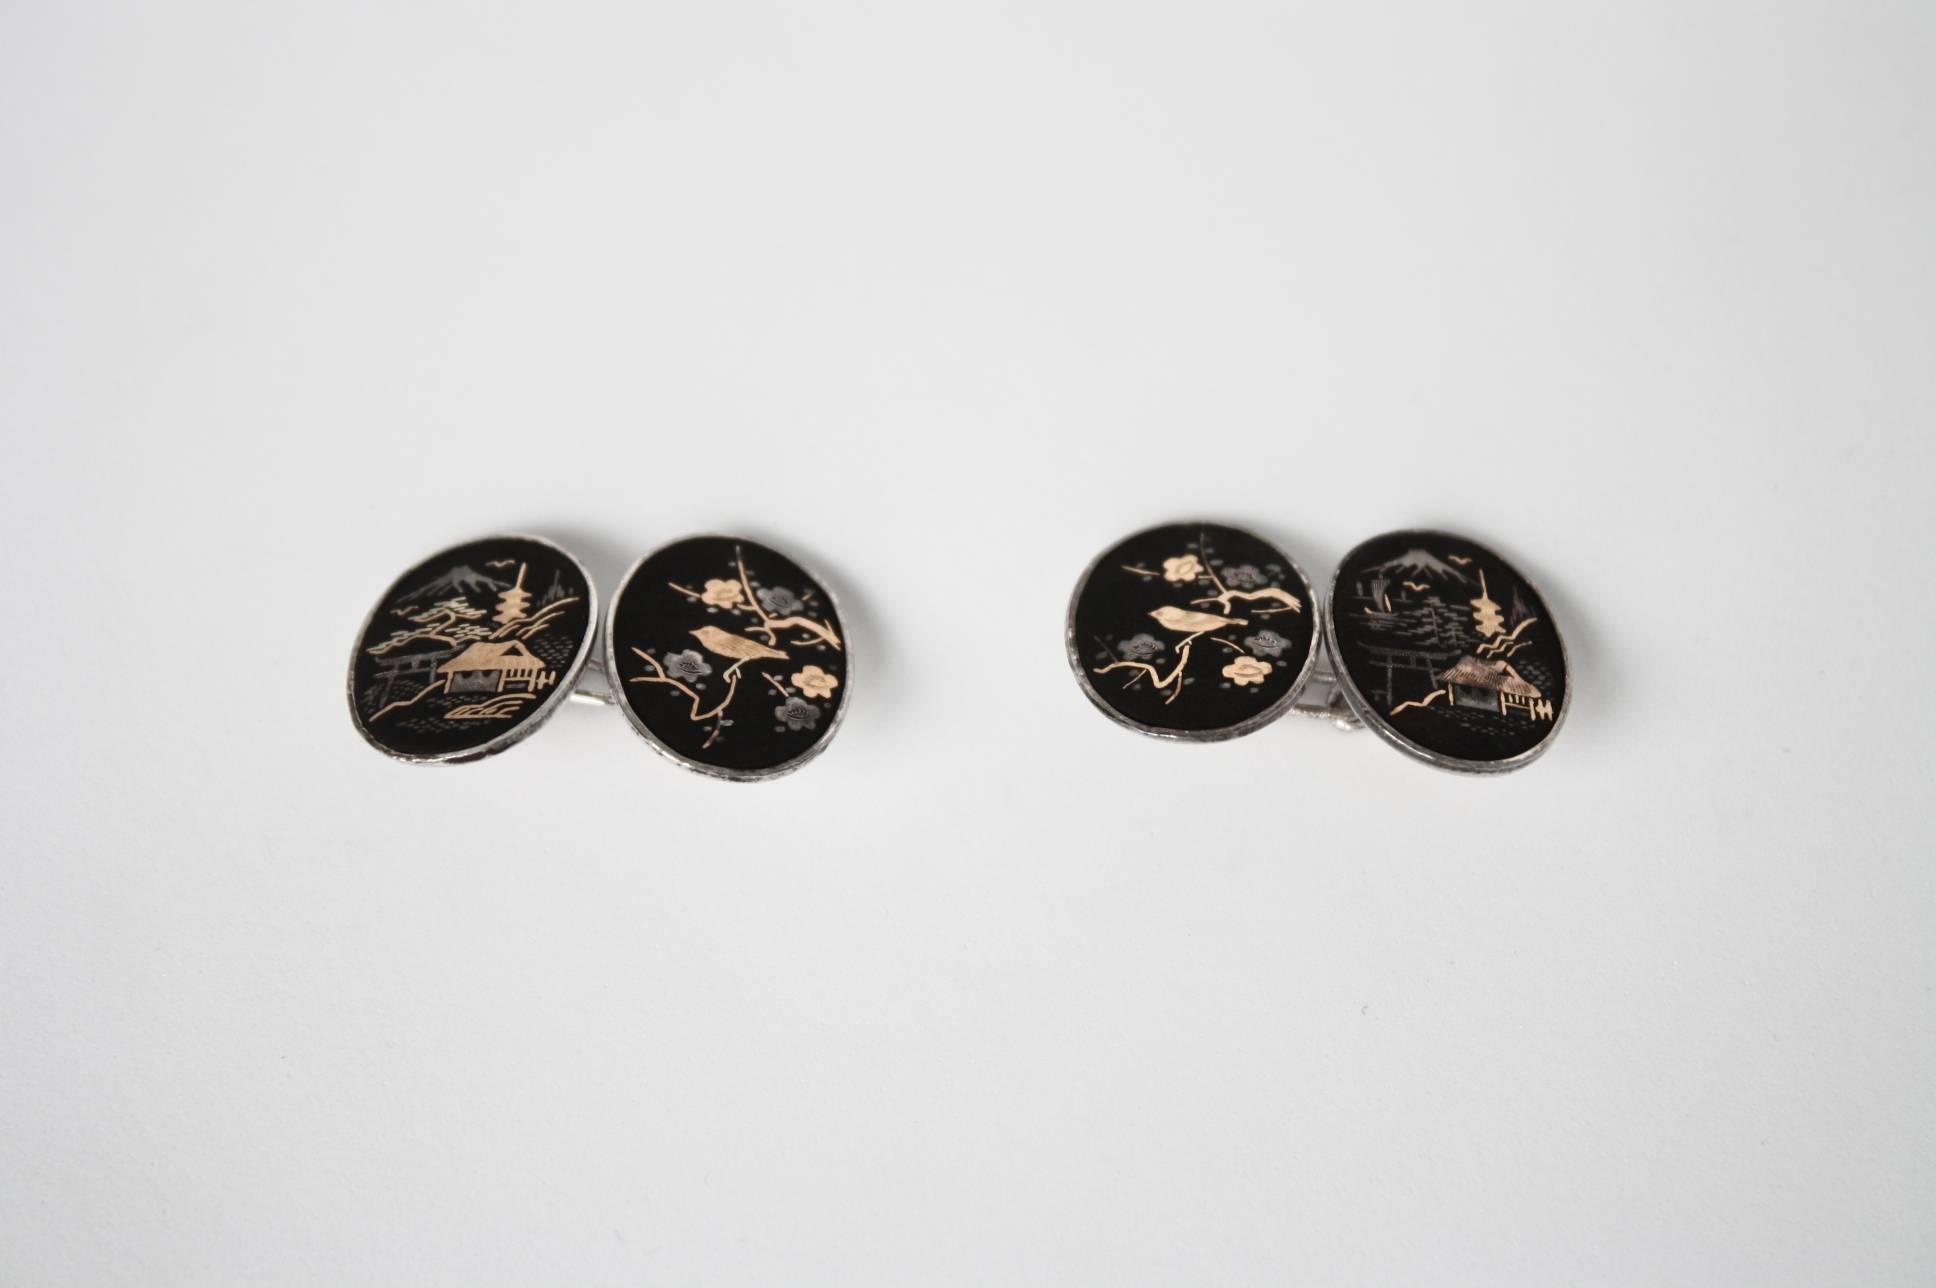 Antiques  1920 Japanies Cufflinks with classic Japanies landscape and floral details black lacquer silver gold.